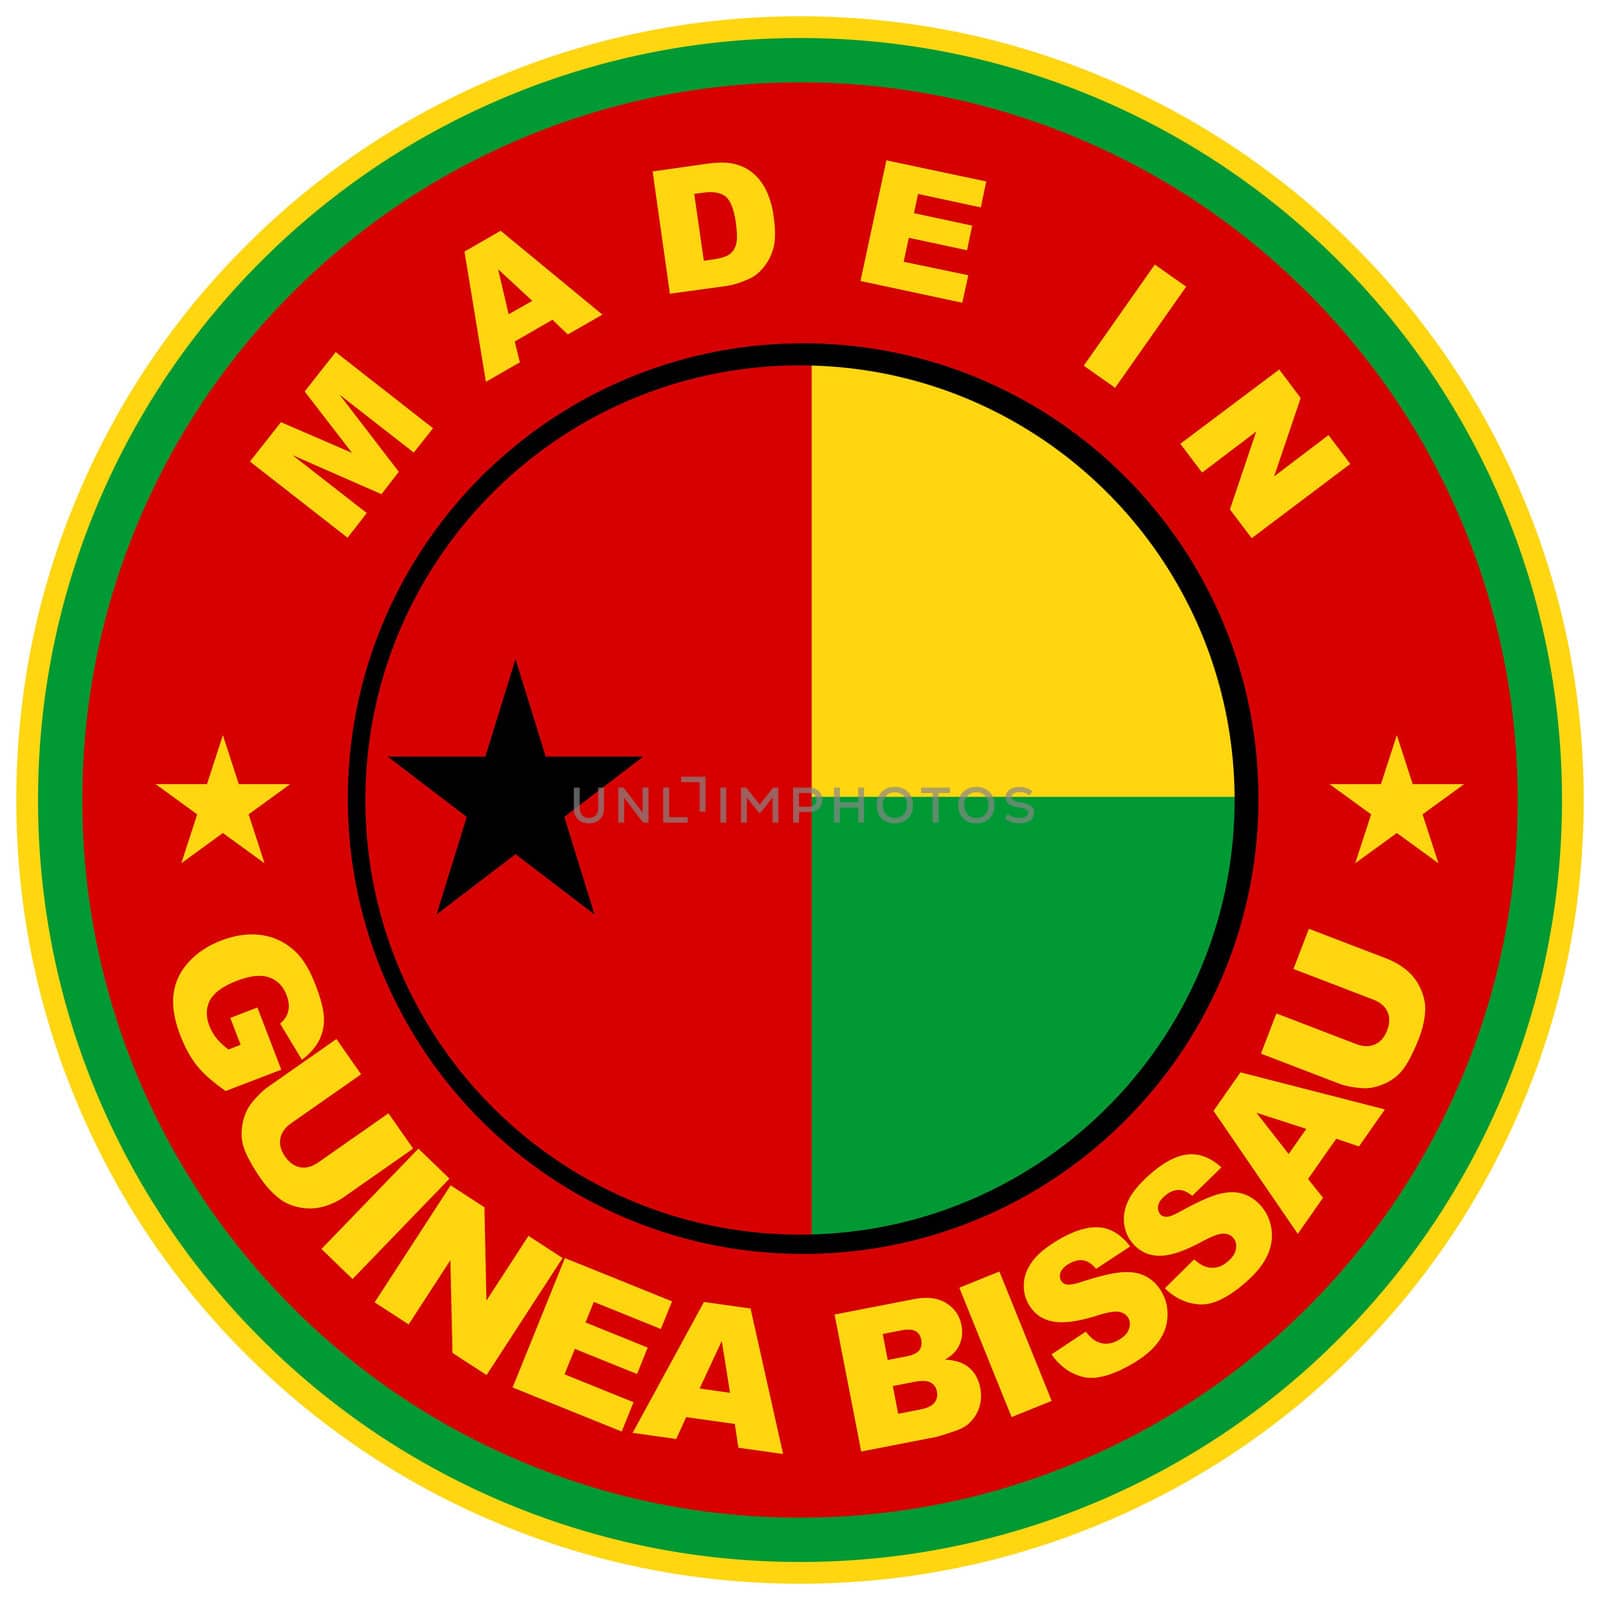 very big size made in guinea bissau country label